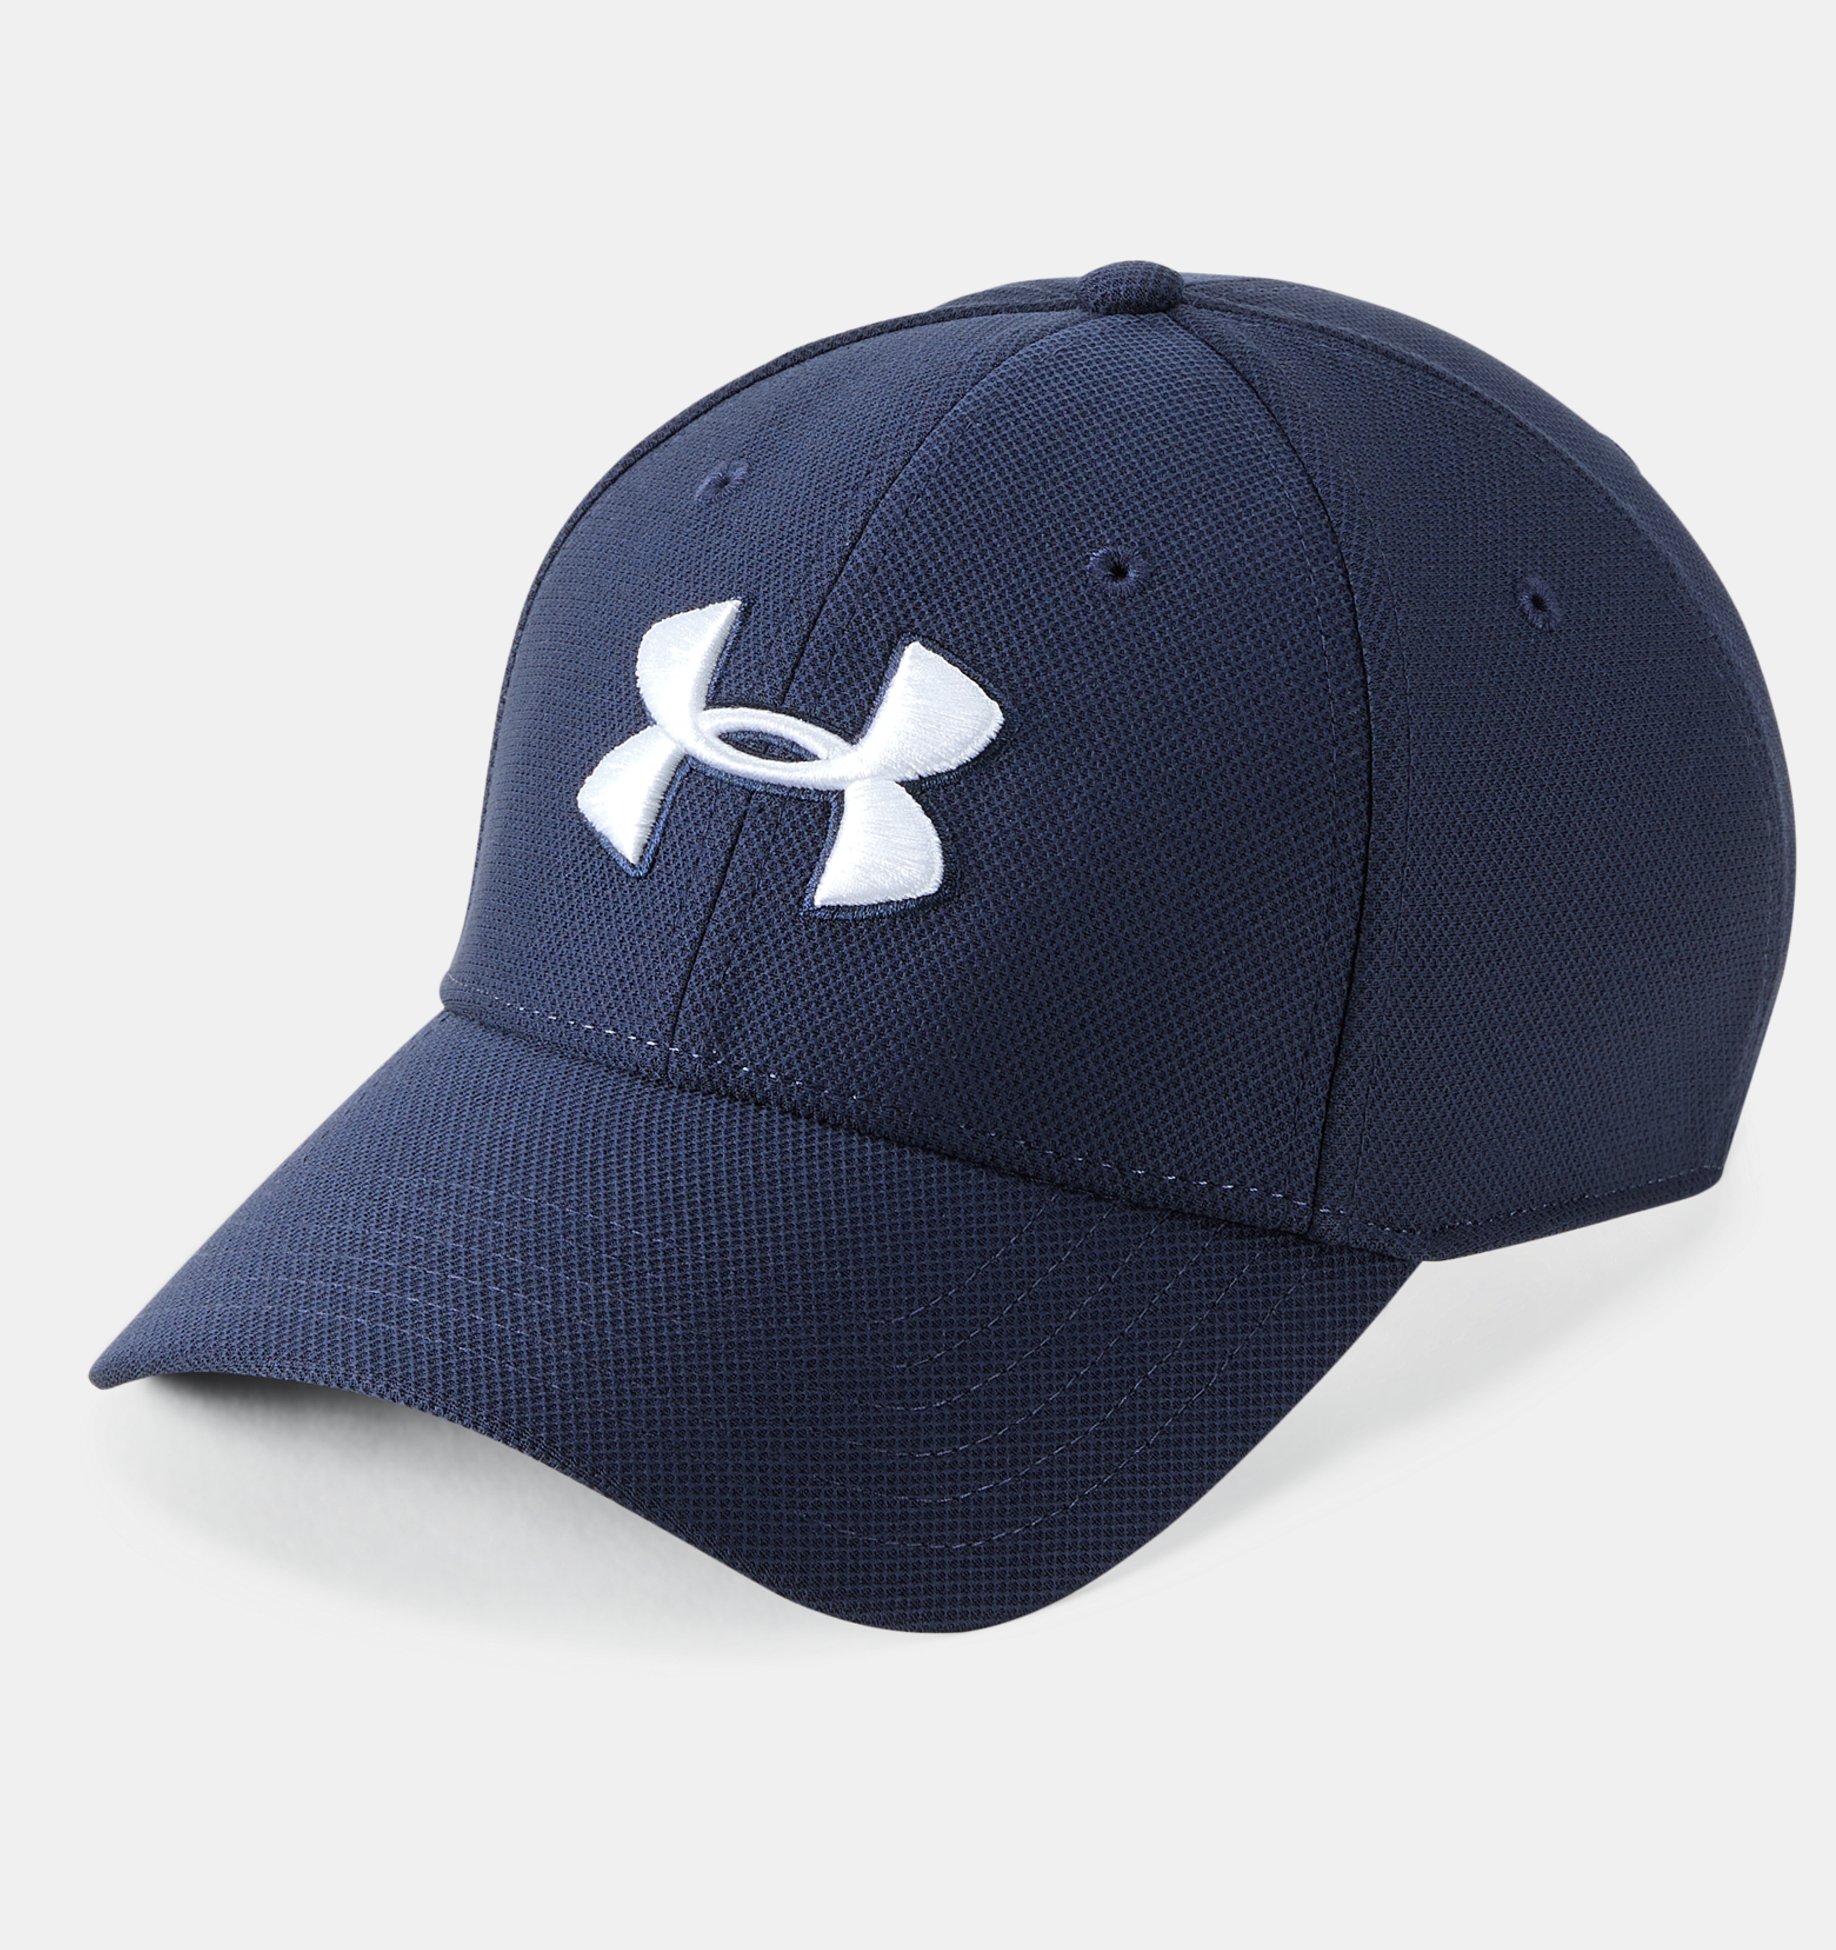 https://www.underarmour.com.ar/on/demandware.static/-/Sites-underarmour_staging/default/dw5ae6b630/new_images/1305036/191169572580/191169572580-1.jpeg